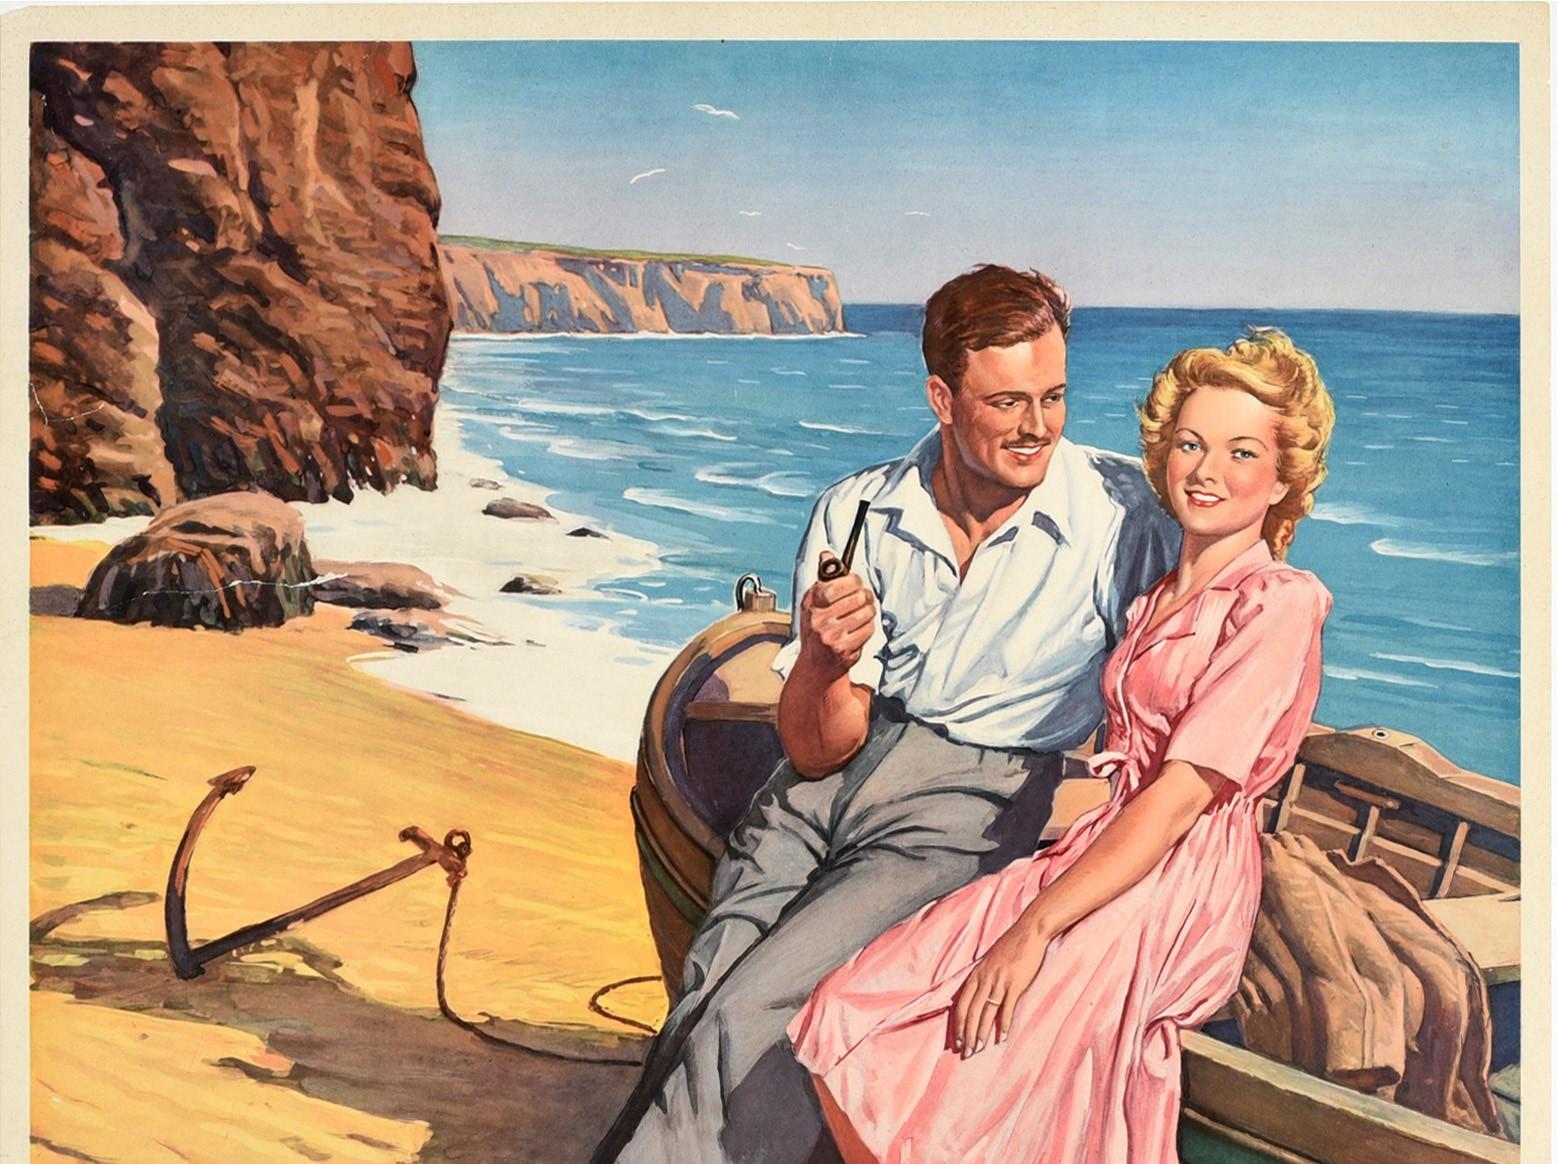 Original vintage advertising poster - Your holidays will make your saving well worth while Invest in the Savings Bank - featuring a young couple enjoying a summer holiday at the seaside with the stylised lettering below, the lady smiling at the